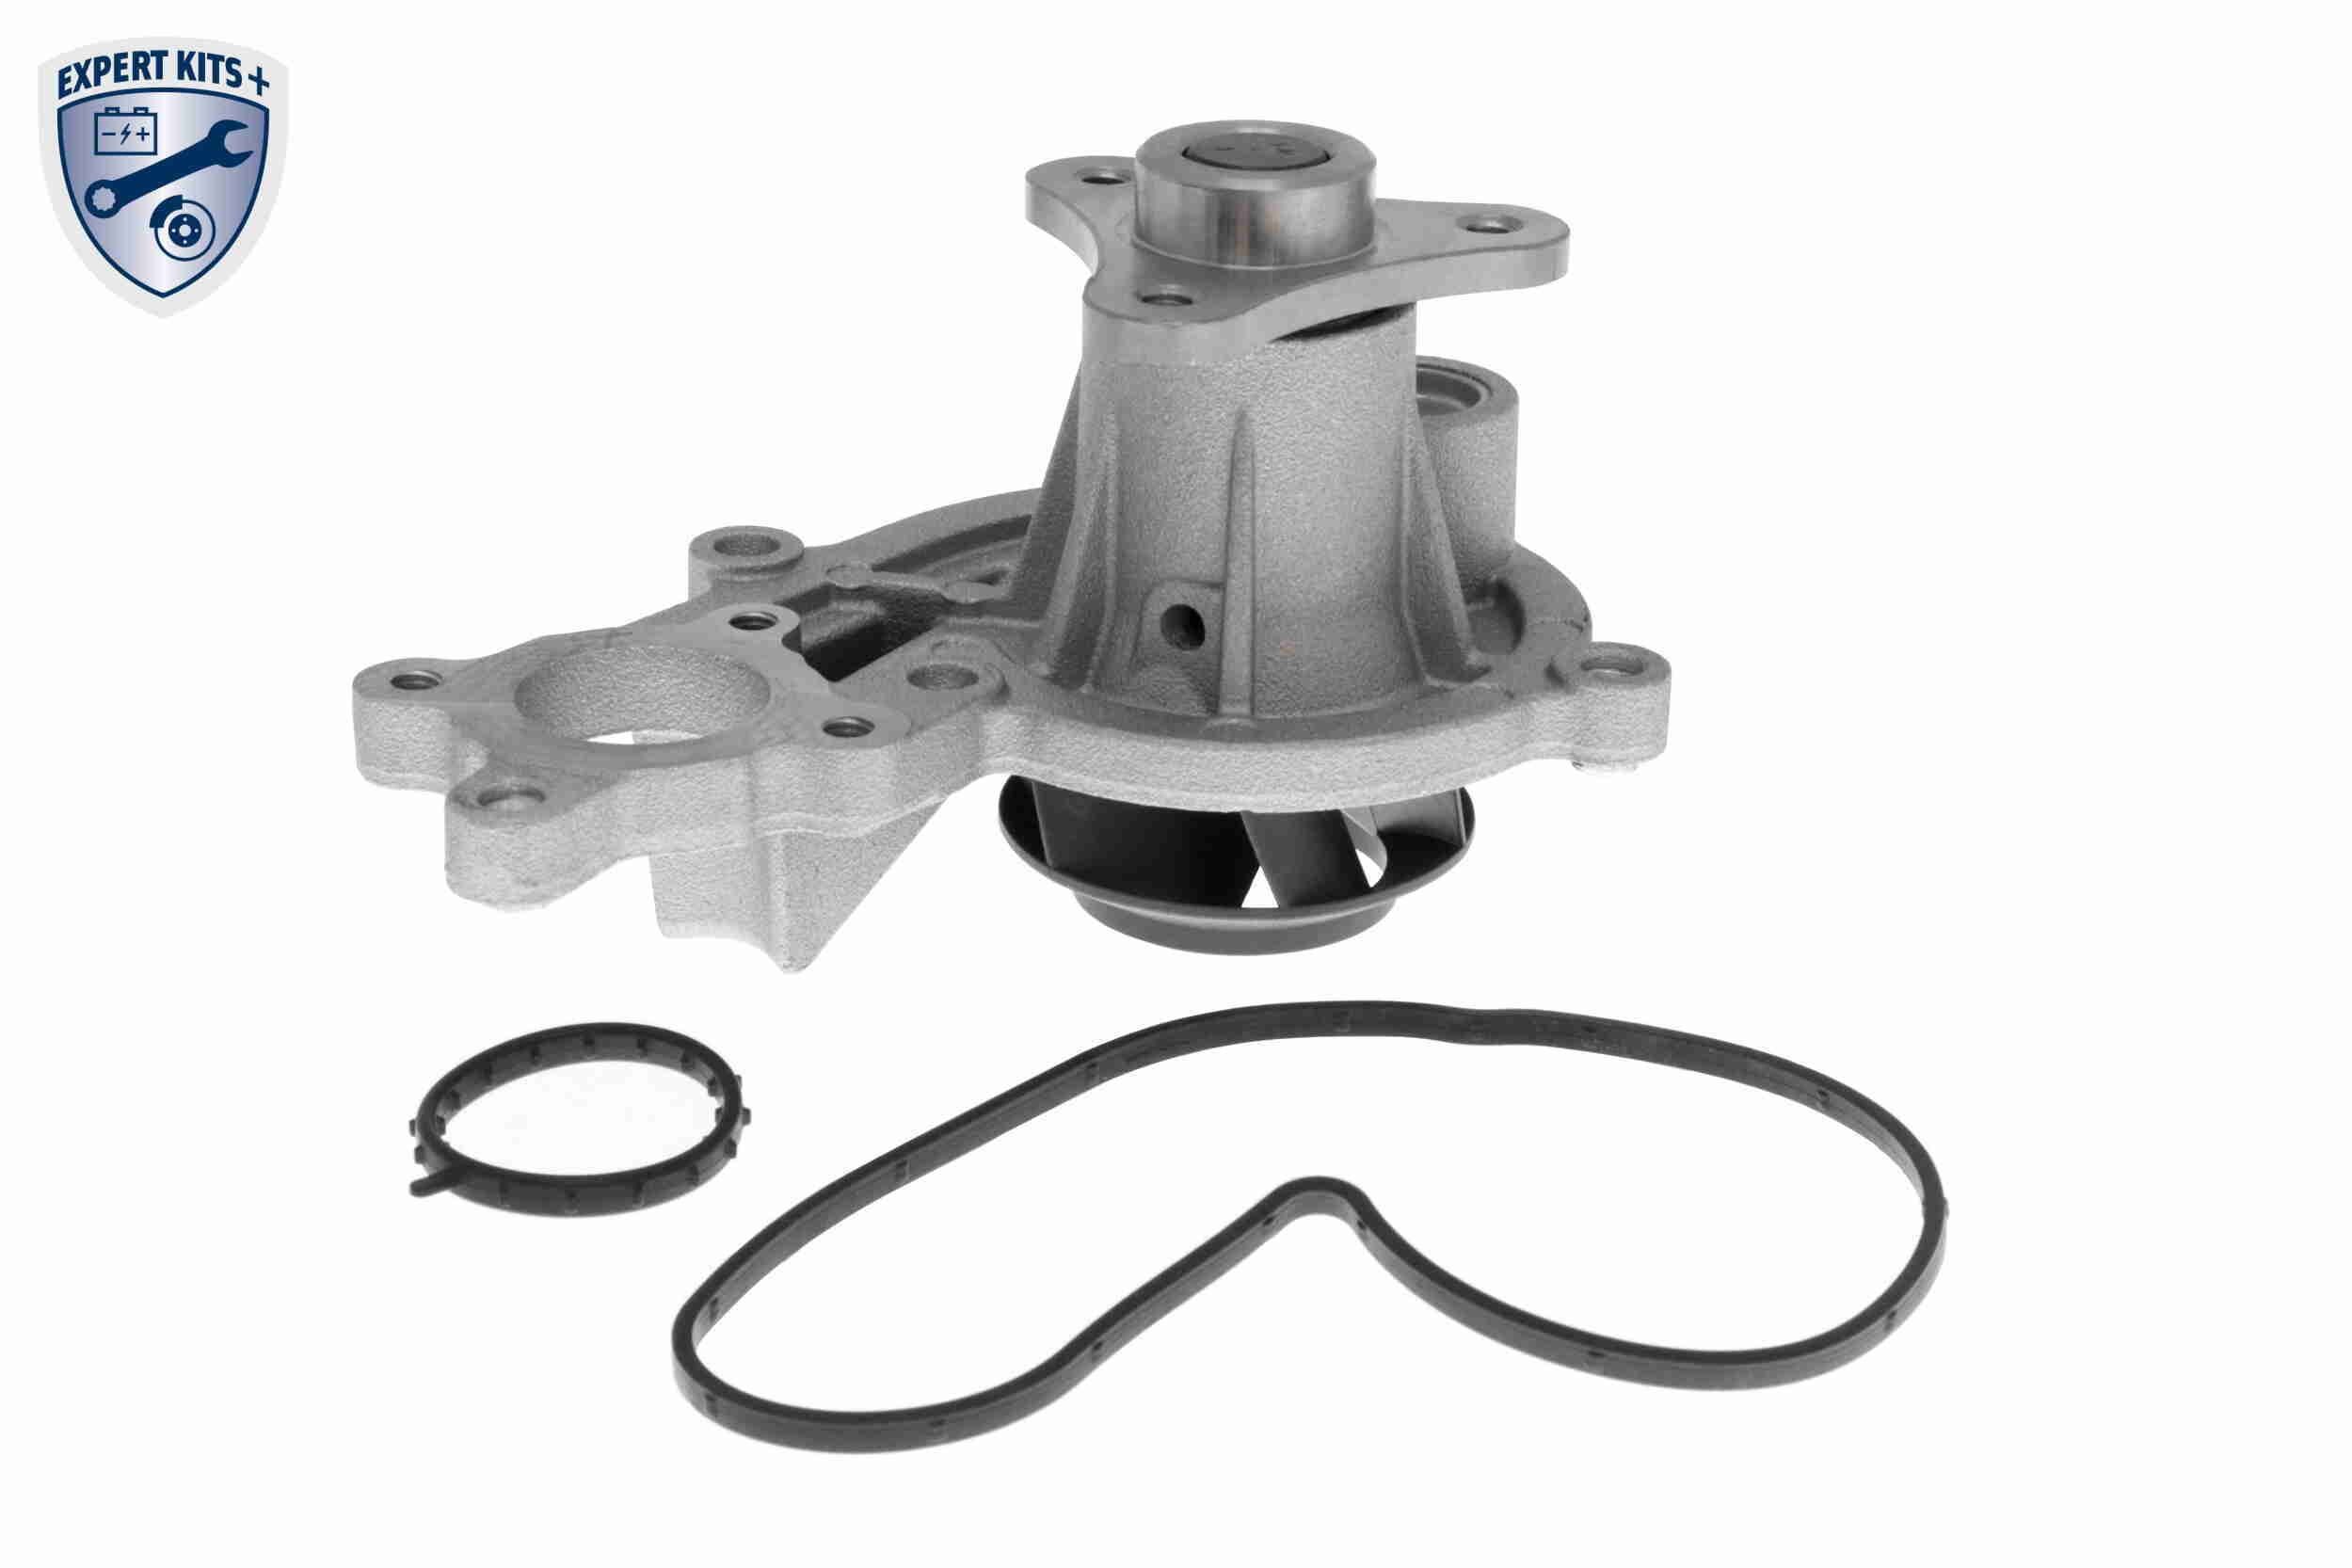 VAV20-4292 - 11 51 8 4 VAICO Grey Cast Iron, with seal, with seal ring, Mechanical, Metal impeller, with housing Water pumps V20-4292 buy